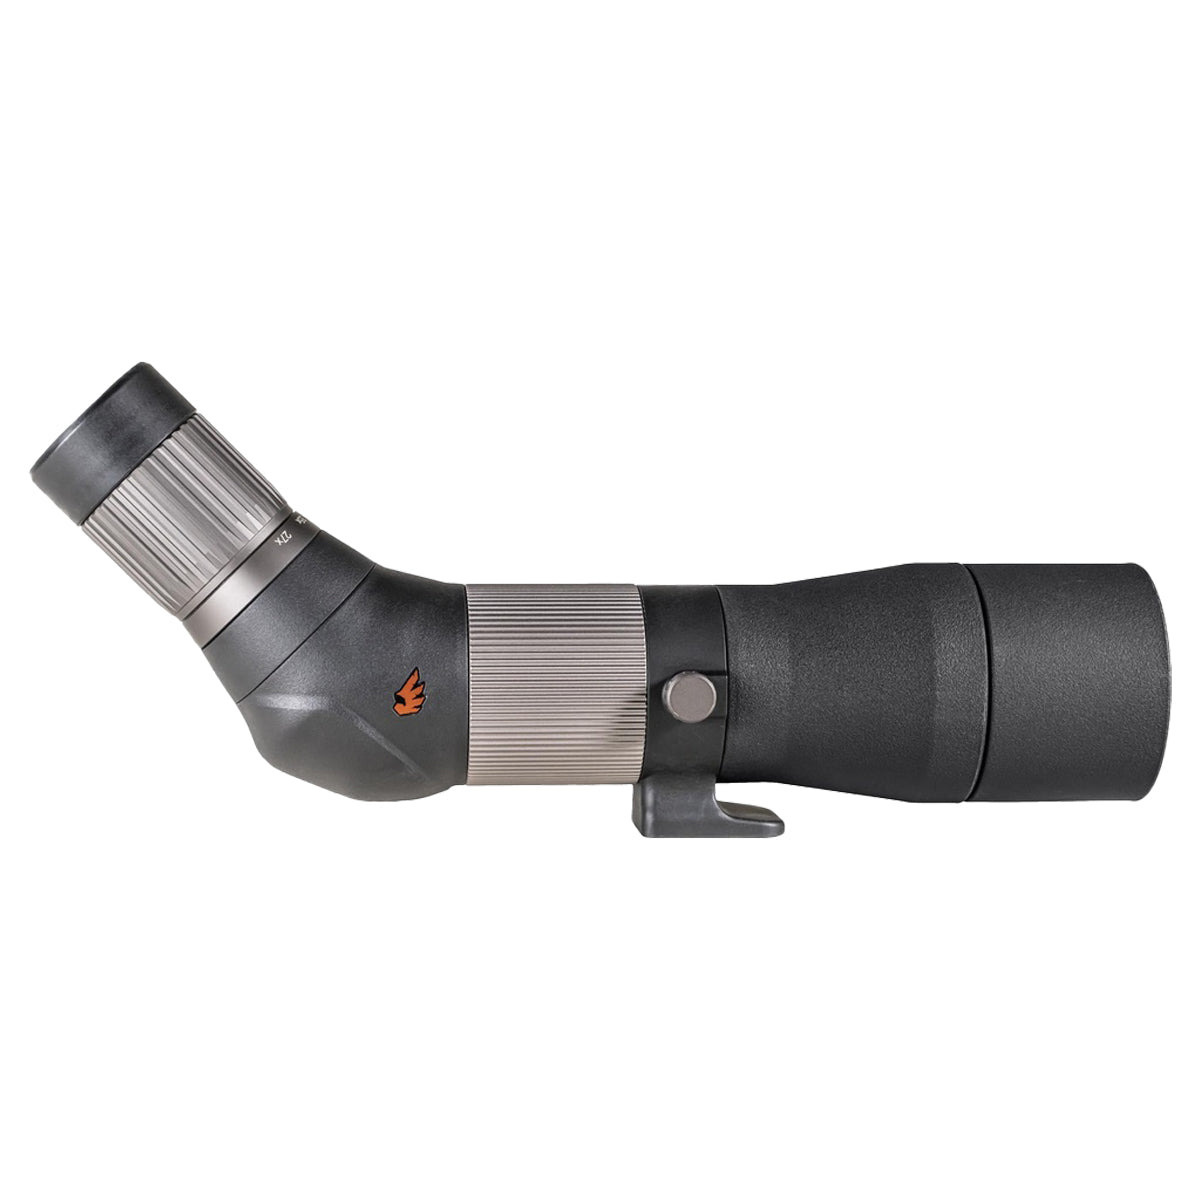 Gunwerks Revic Acura S65a Angled Spotting Scope in  by GOHUNT | Revic - GOHUNT Shop